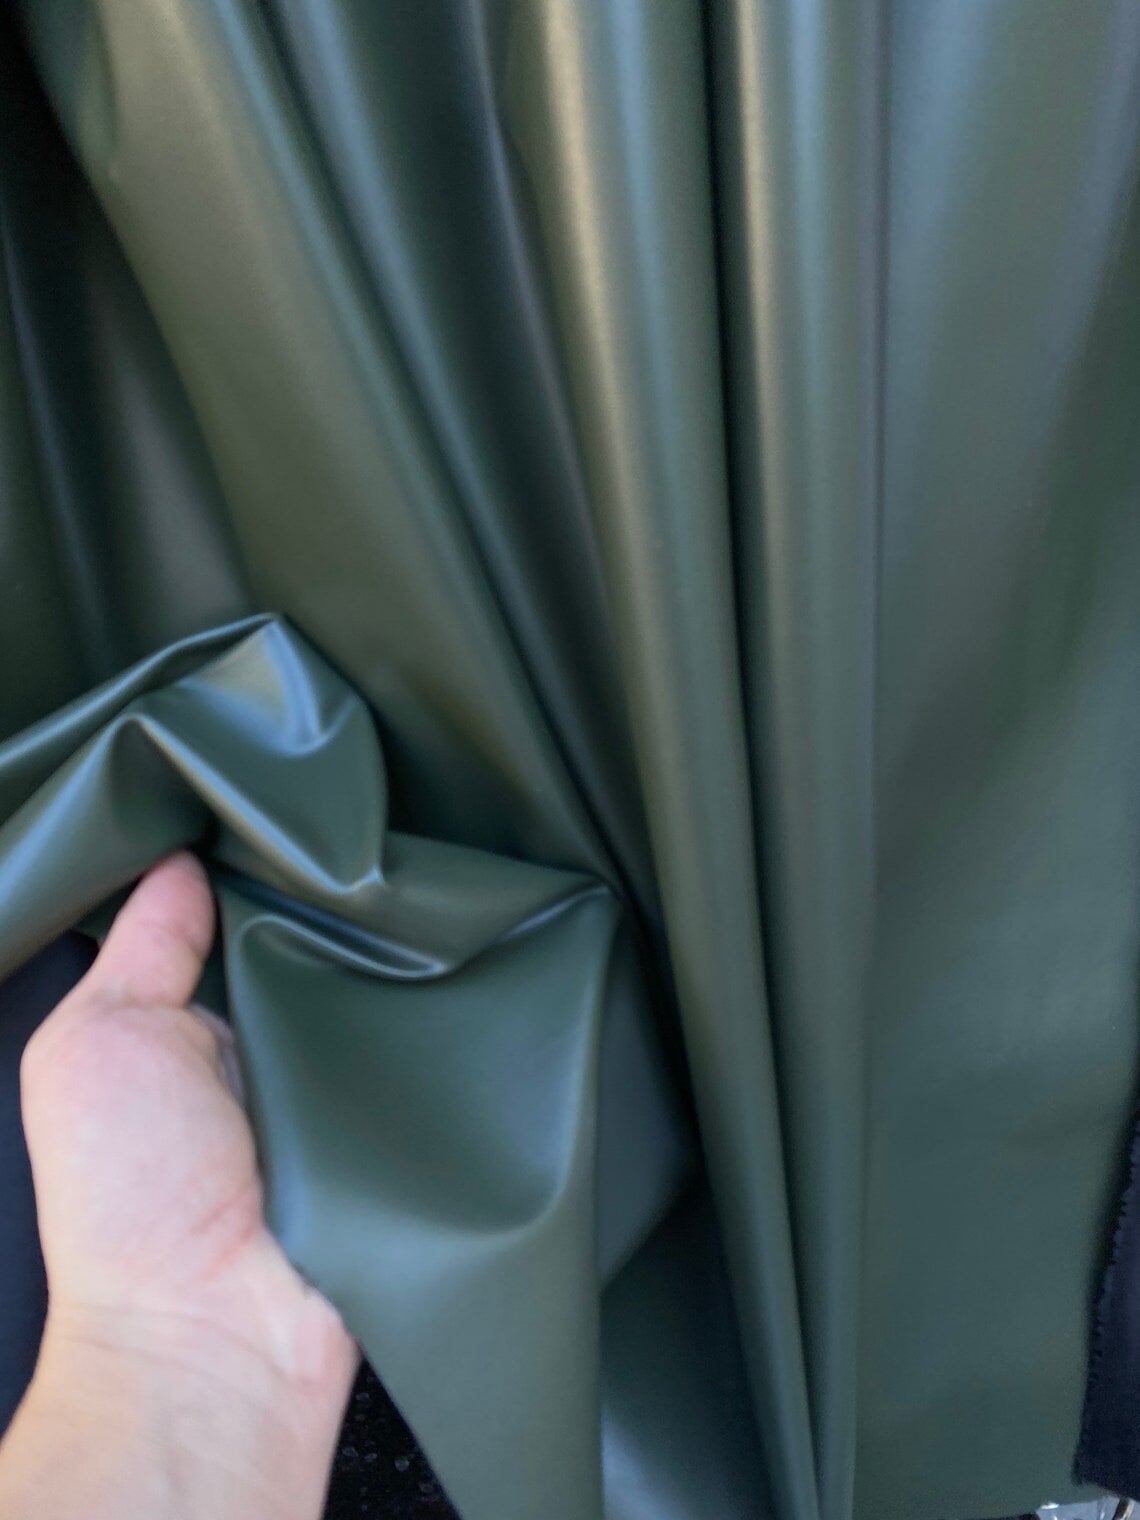 olive green stretch faux leather, olive stretch pleather, olive green stretch soft vinyl, olive green stretch vinyl, faux leather stretch for clothing, Faux Leather for jackets, Faux Leather for bags, Faux Leather on discount, Faux Leather on sale, premium Faux Leather, green Faux Leather, light green Faux Leather, Faux Leather for tops, Faux Leather for leggings